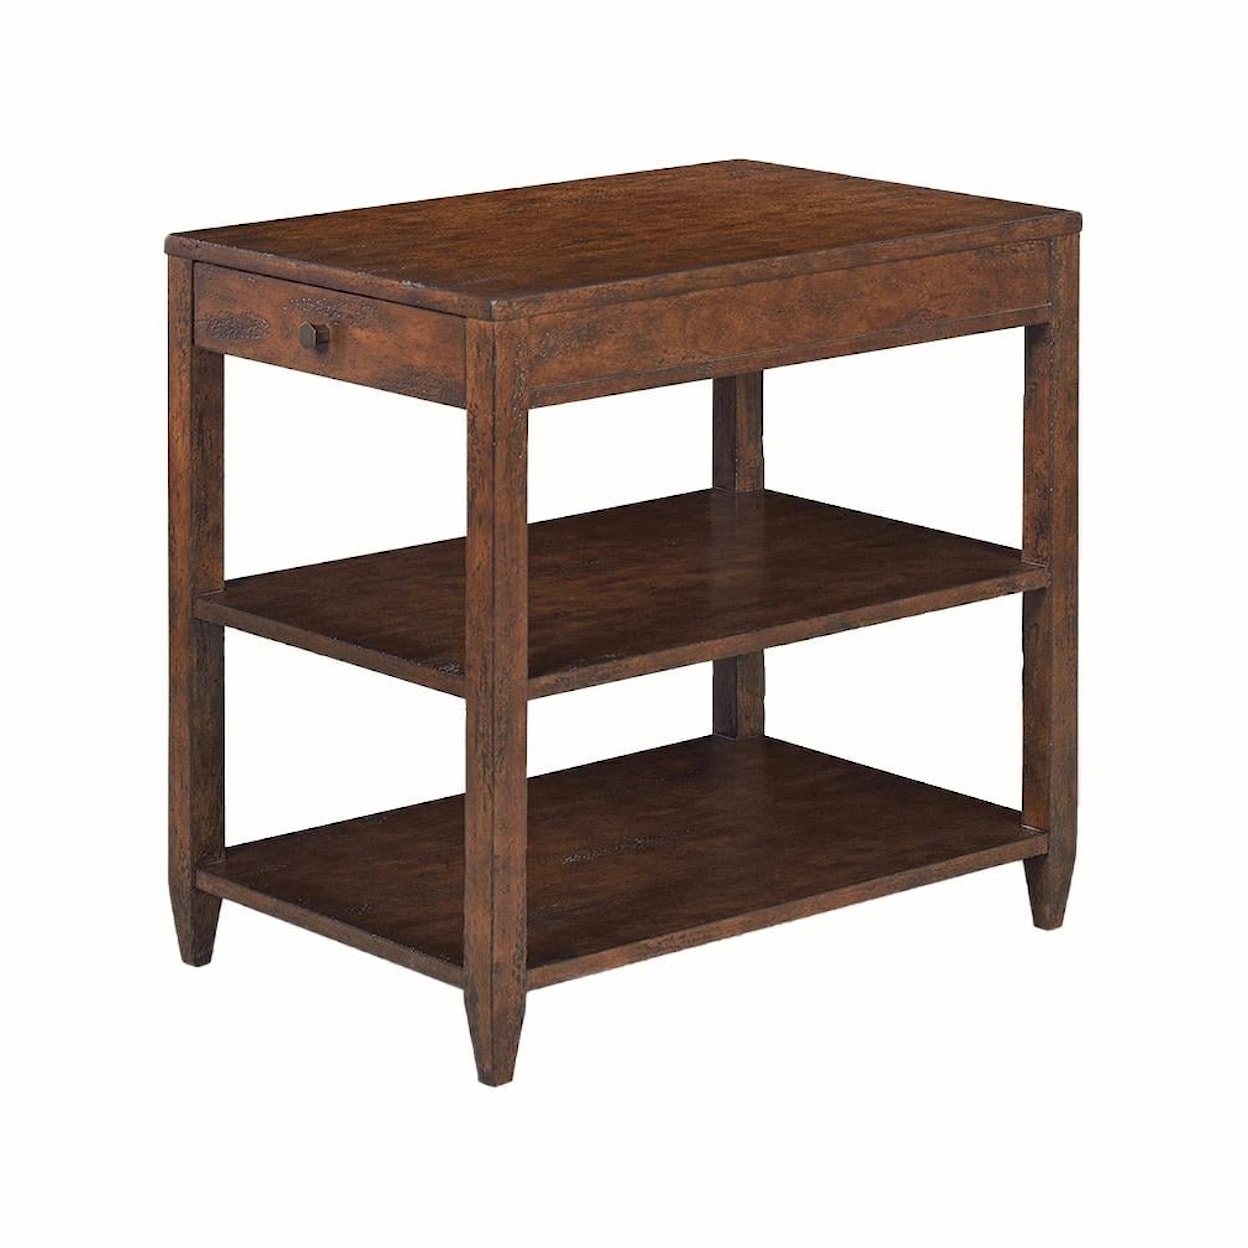 Oliver Home Furnishings End/ Side Tables NARROW, 2 SHELF SIDE TABLE- COUNTRY